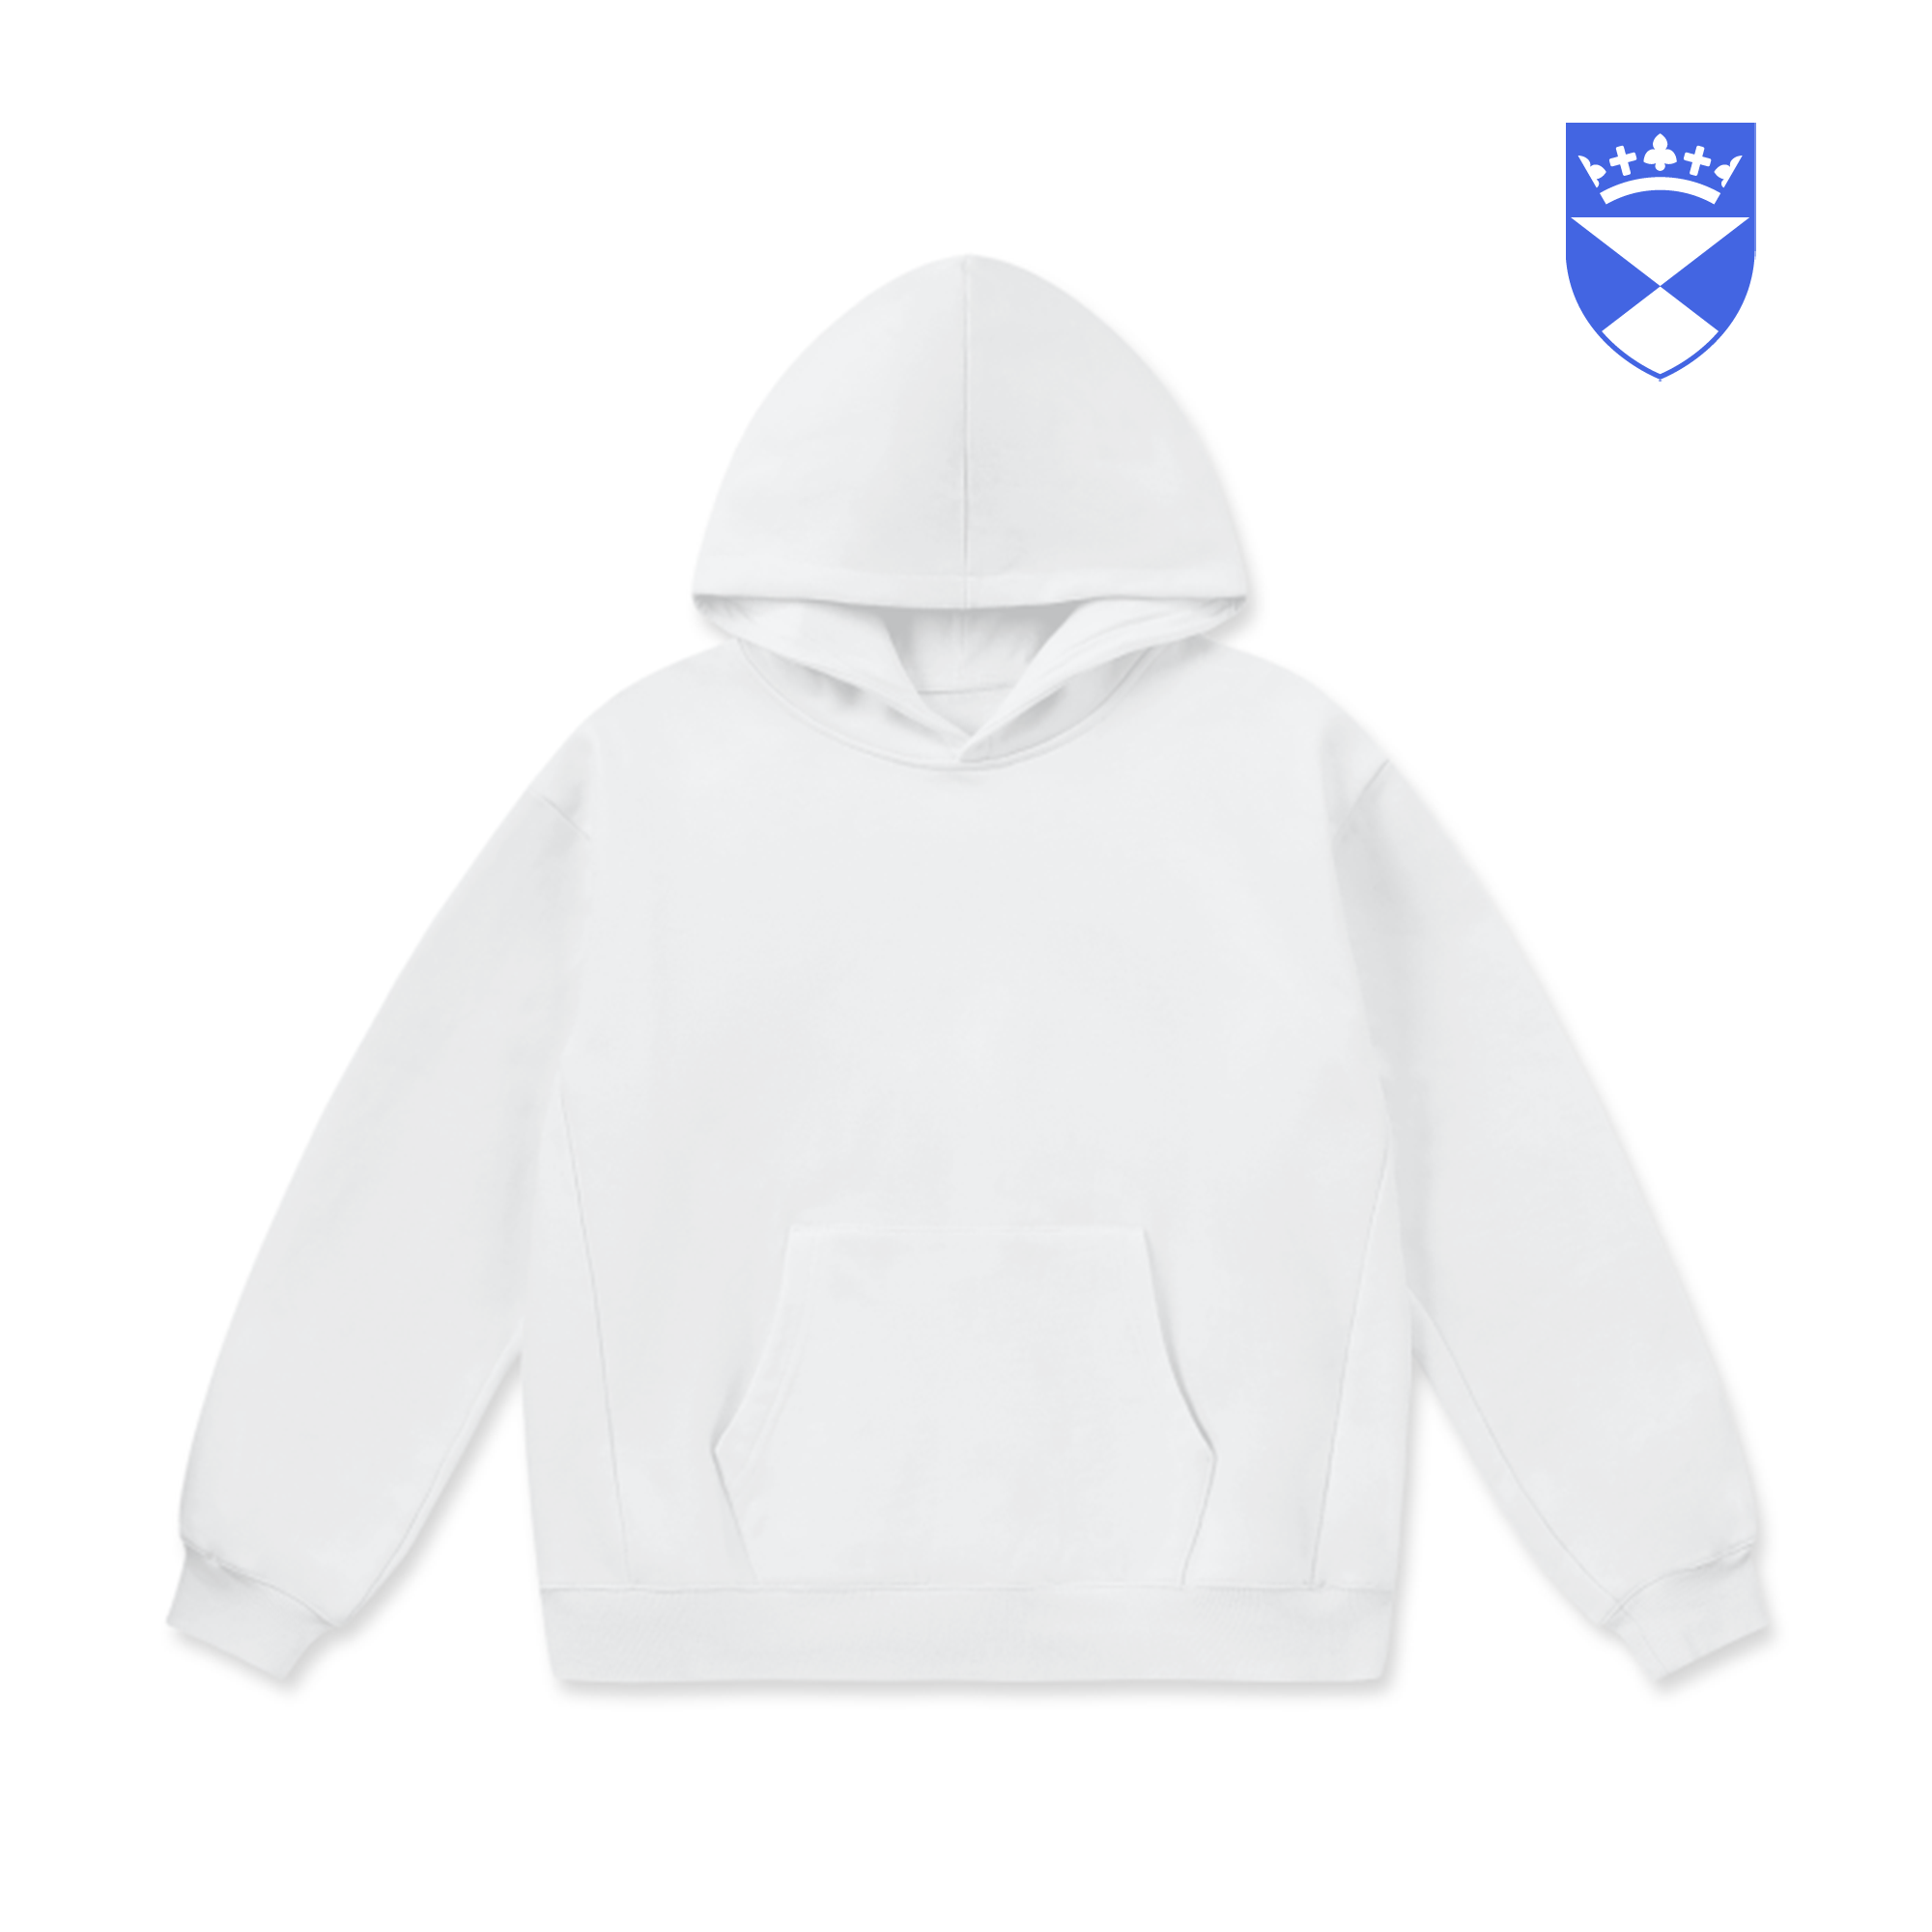 LCC Super Weighted Hoodie - University of Dundee (Classic)